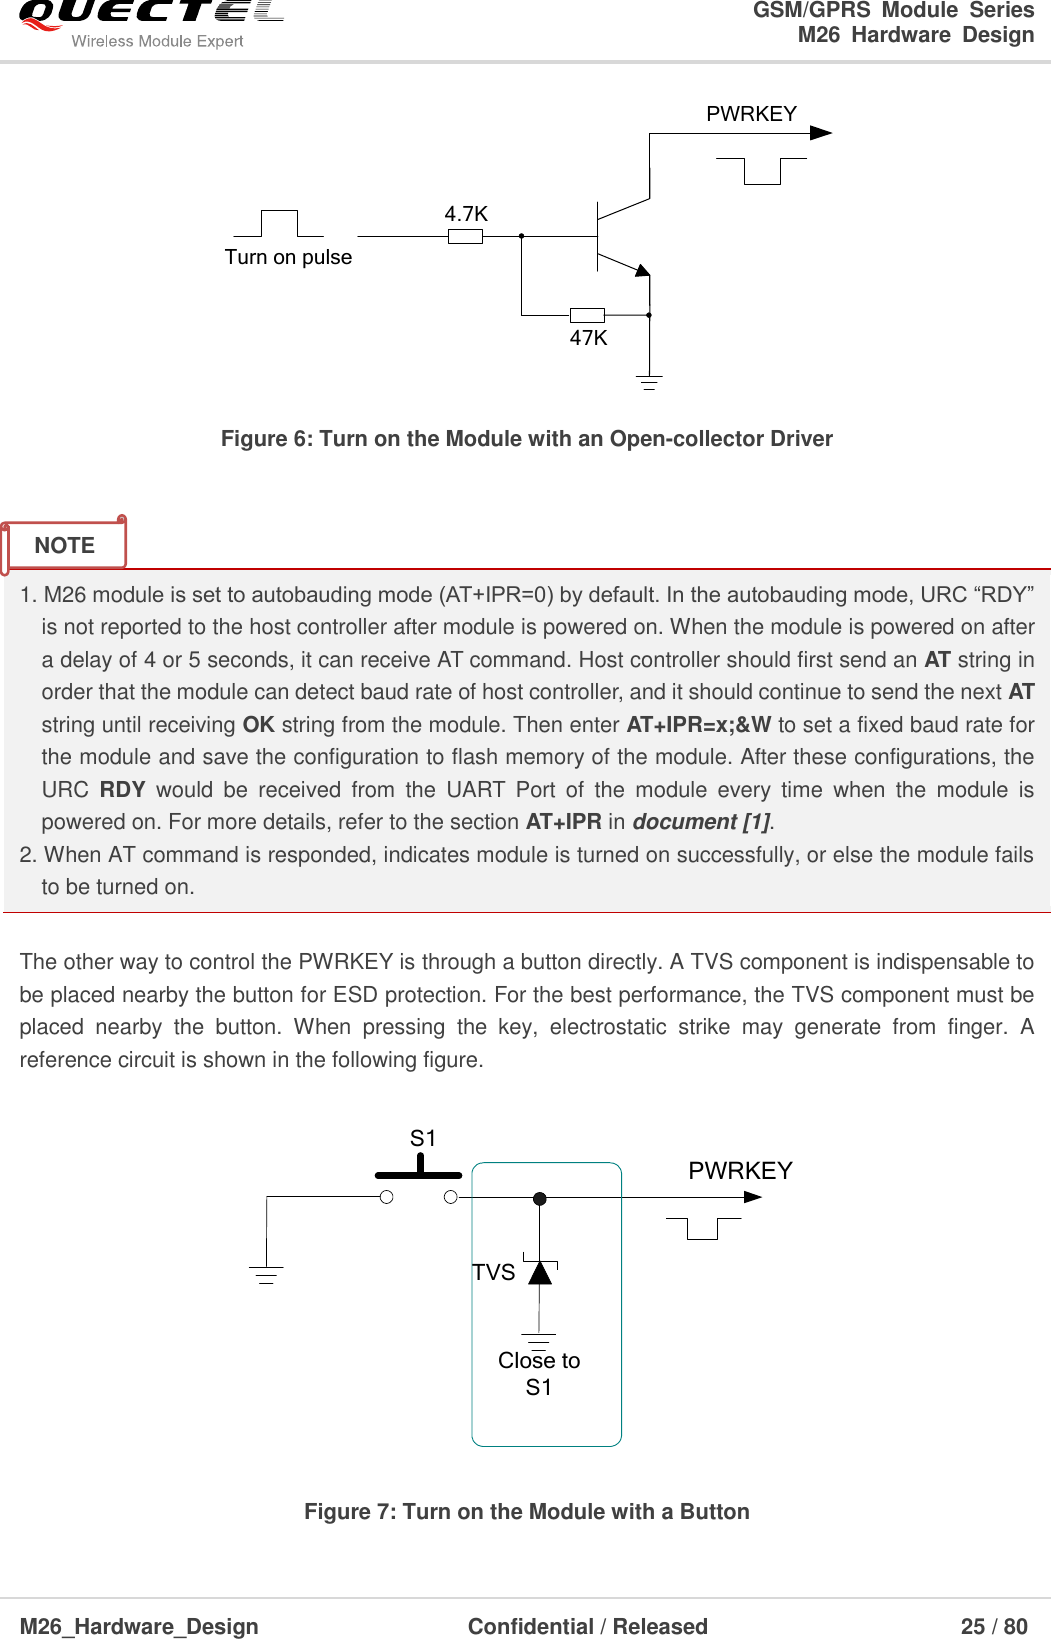                                                                        GSM/GPRS  Module  Series                                                                 M26  Hardware  Design  M26_Hardware_Design                     Confidential / Released                              25 / 80      Turn on pulsePWRKEY4.7K47K Figure 6: Turn on the Module with an Open-collector Driver   1. M26 module is set to autobauding mode (AT+IPR=0) by default. In the autobauding mode, URC ―RDY‖ is not reported to the host controller after module is powered on. When the module is powered on after a delay of 4 or 5 seconds, it can receive AT command. Host controller should first send an AT string in order that the module can detect baud rate of host controller, and it should continue to send the next AT string until receiving OK string from the module. Then enter AT+IPR=x;&amp;W to set a fixed baud rate for the module and save the configuration to flash memory of the module. After these configurations, the URC  RDY  would  be  received  from  the  UART  Port  of  the  module  every  time  when  the  module  is powered on. For more details, refer to the section AT+IPR in document [1].   2. When AT command is responded, indicates module is turned on successfully, or else the module fails to be turned on.  The other way to control the PWRKEY is through a button directly. A TVS component is indispensable to be placed nearby the button for ESD protection. For the best performance, the TVS component must be placed  nearby  the  button.  When  pressing  the  key,  electrostatic  strike  may  generate  from  finger.  A reference circuit is shown in the following figure.  PWRKEYS1Close to S1TVS Figure 7: Turn on the Module with a Button NOTE 